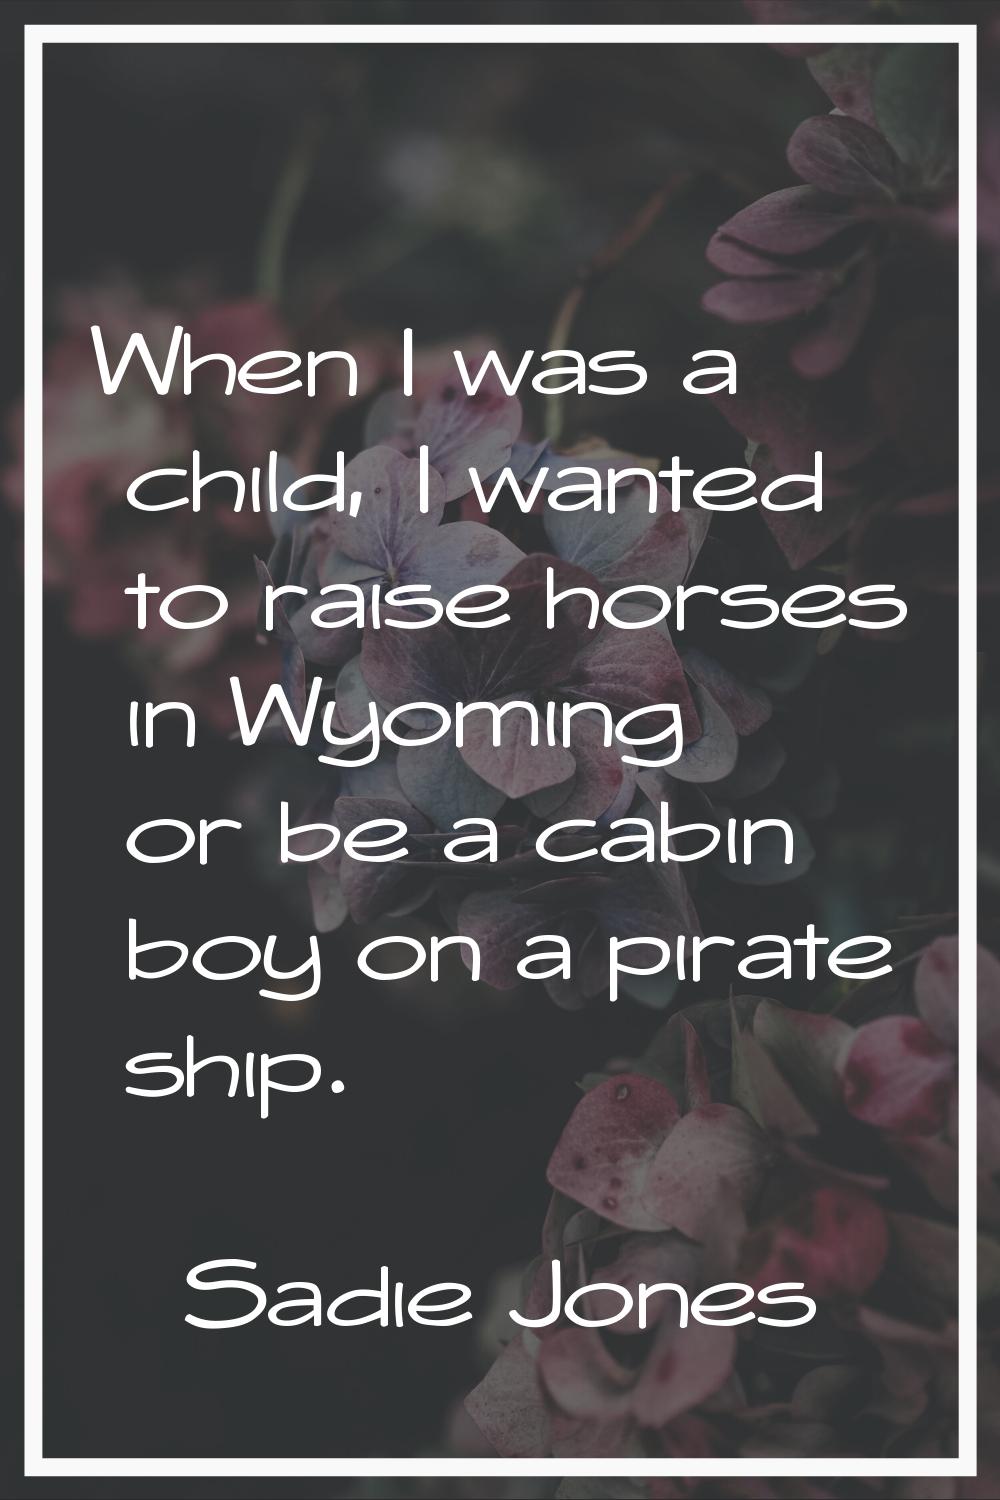 When I was a child, I wanted to raise horses in Wyoming or be a cabin boy on a pirate ship.